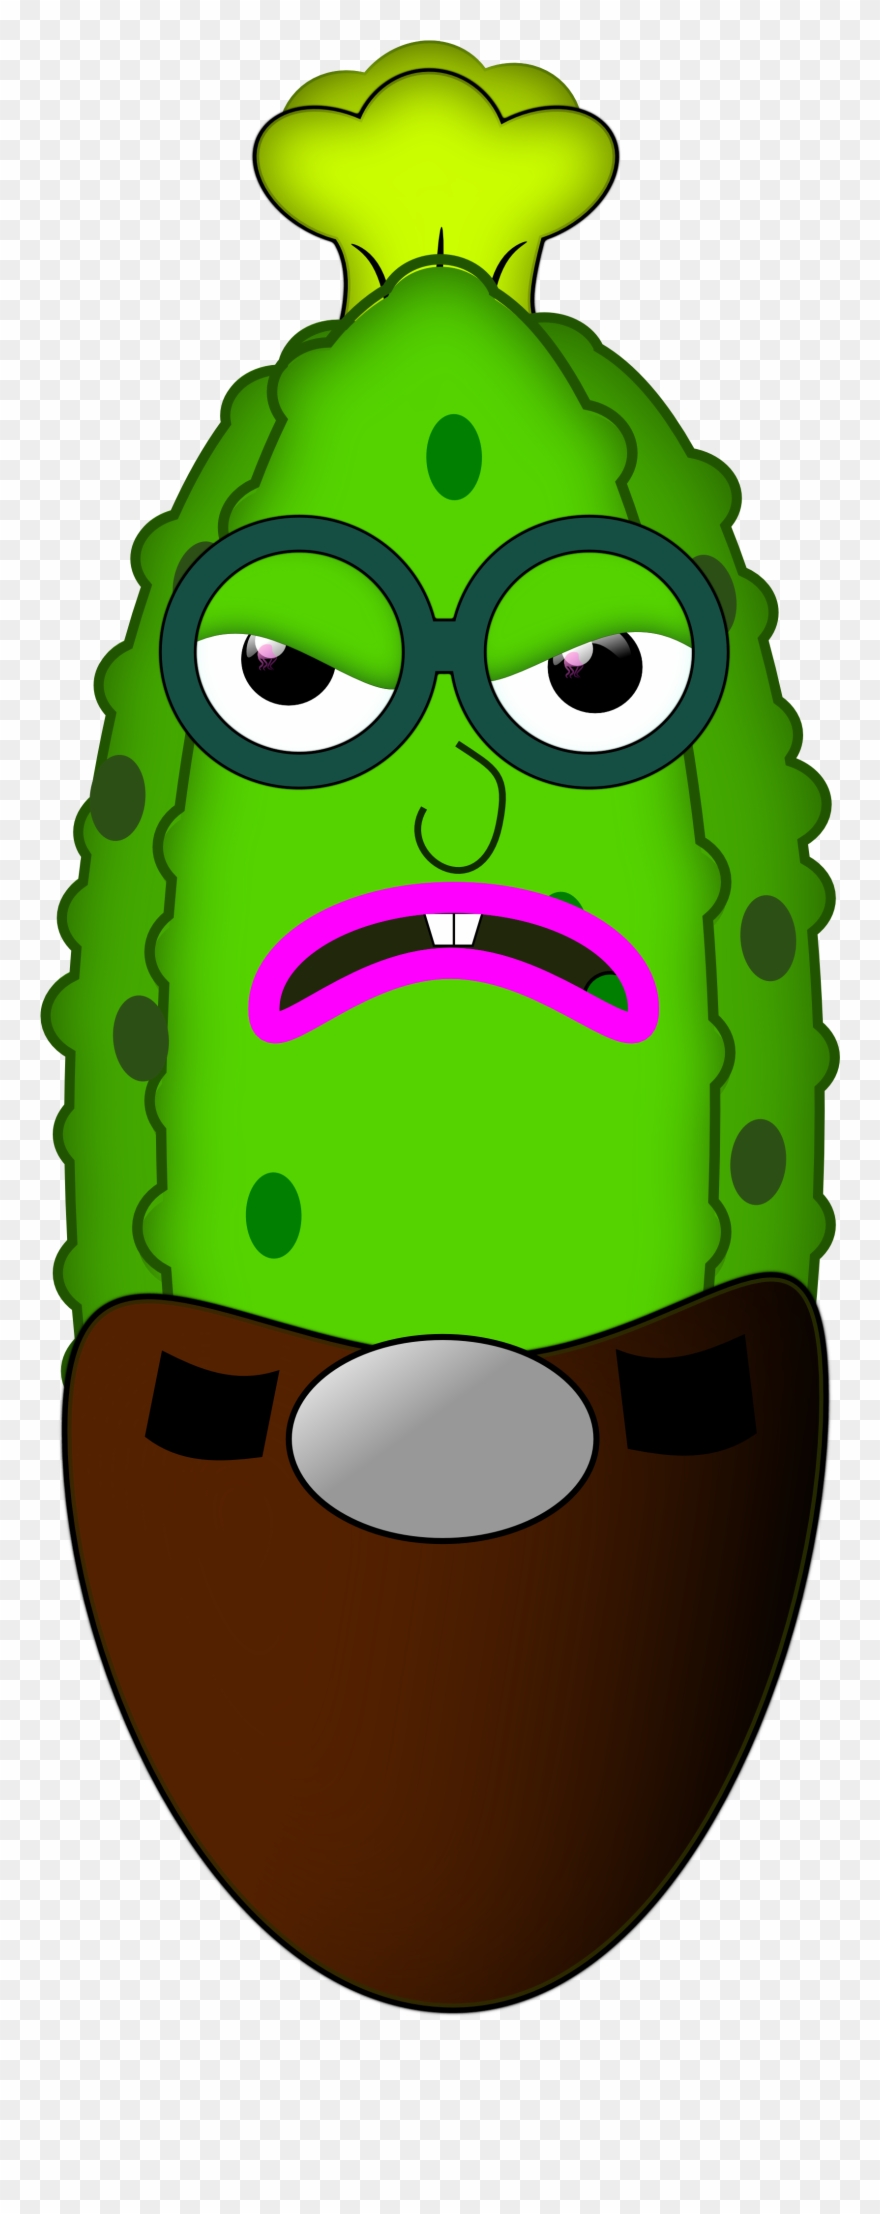 pickle clipart cool as cucumber